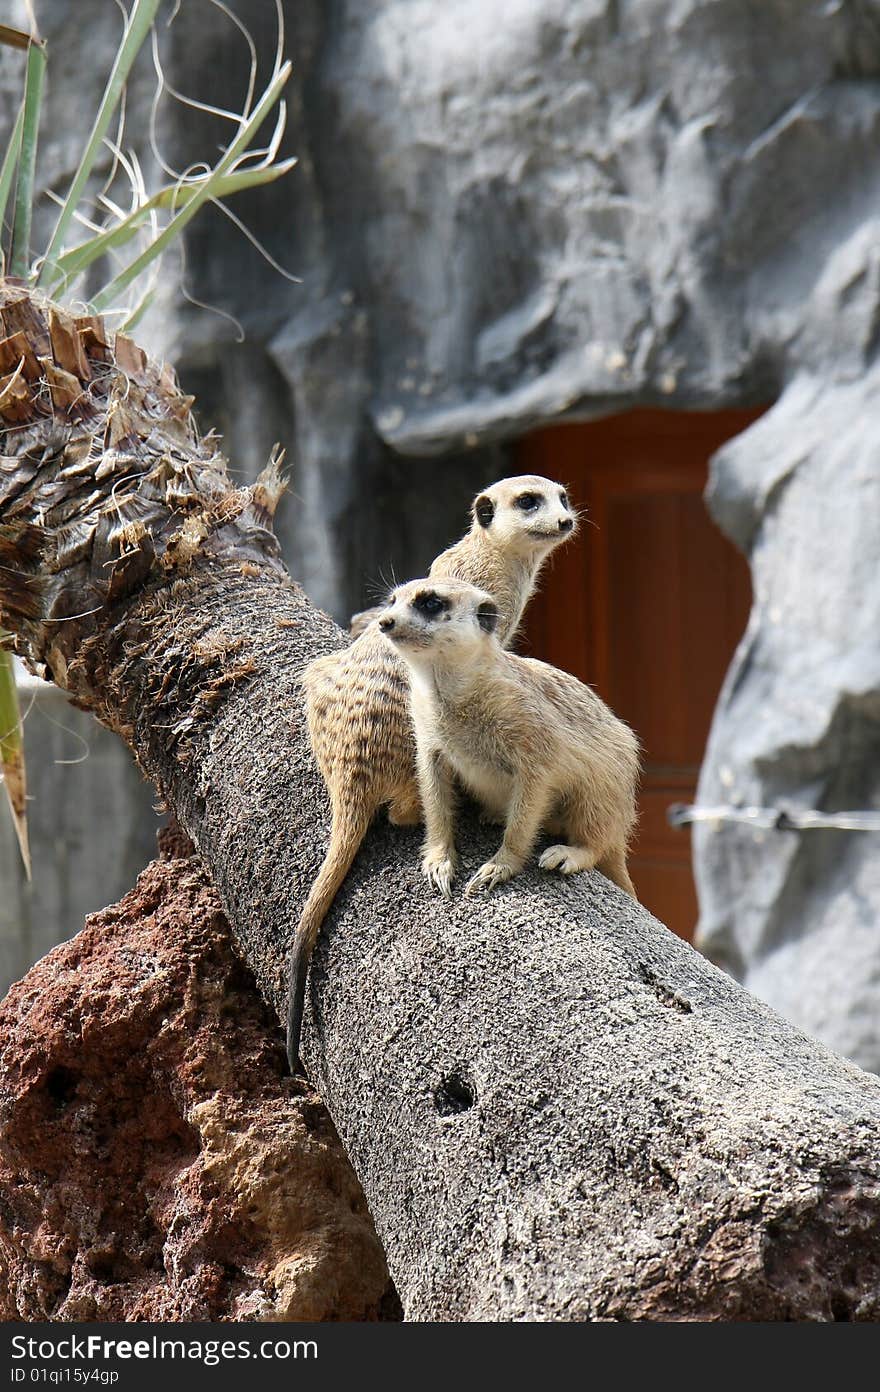 Two meerkats looking in different directions on a tree. Two meerkats looking in different directions on a tree